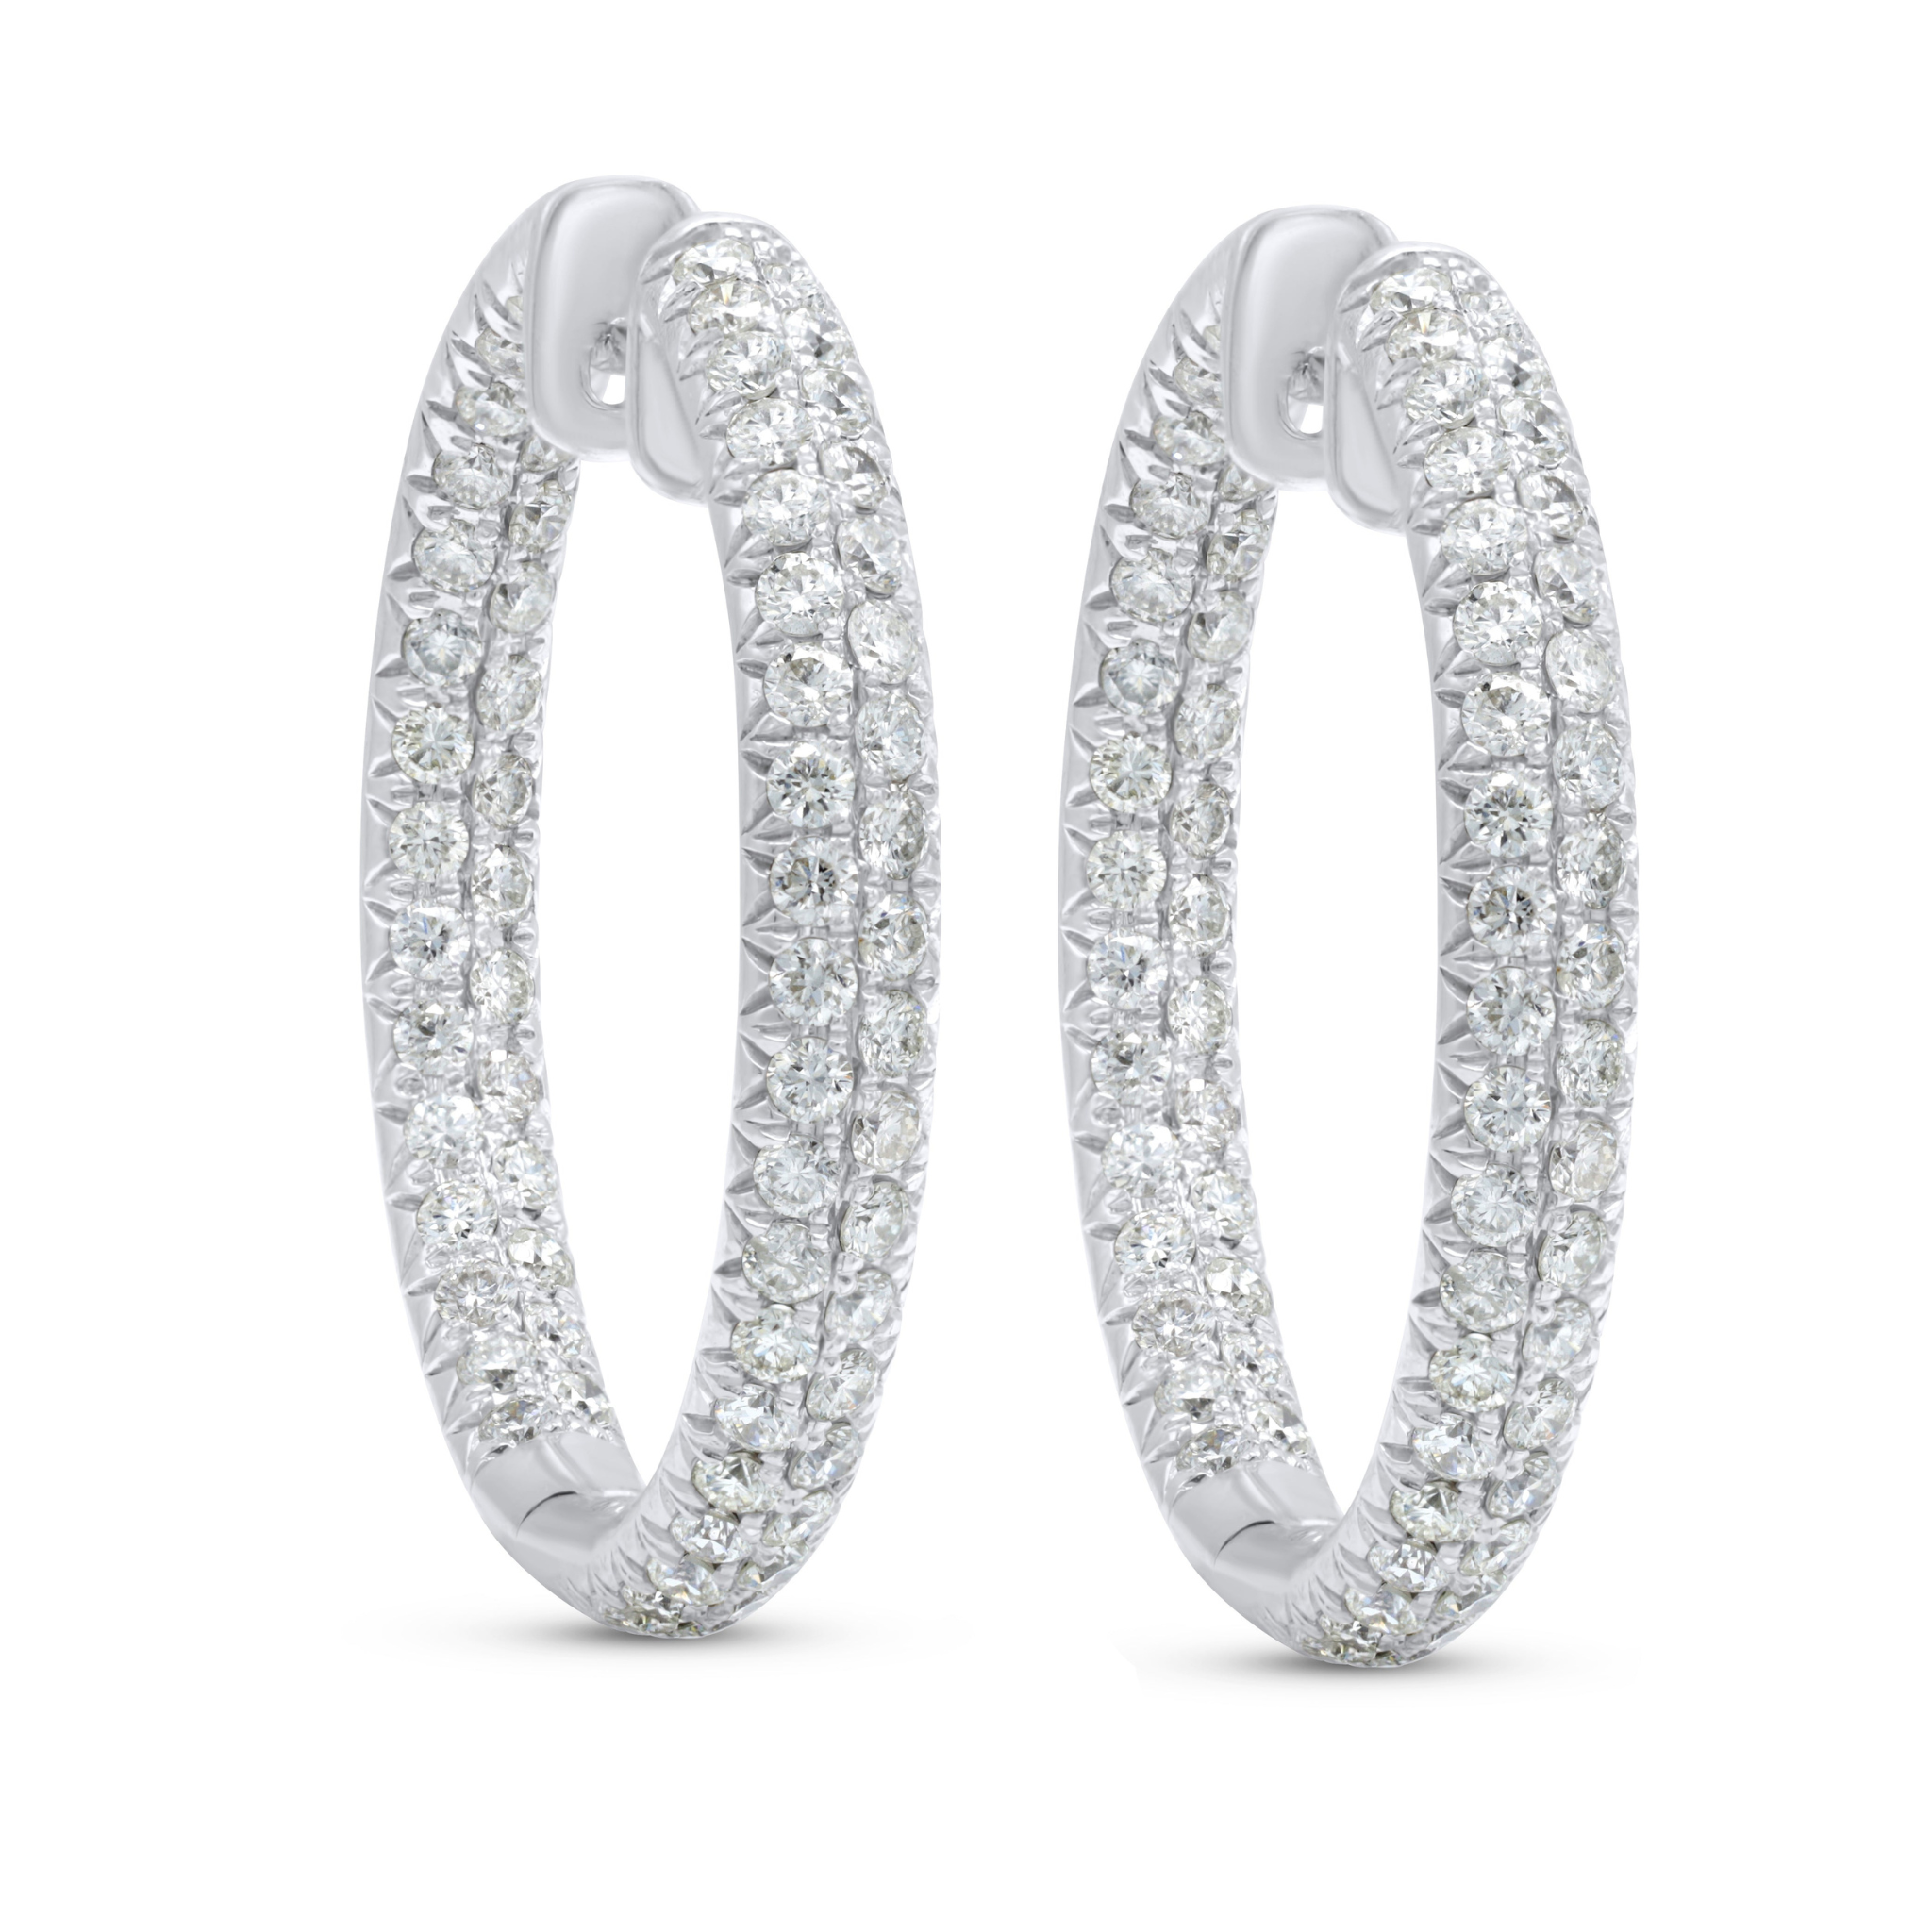 14 Kt White Gold Hoop Earrings with 2 Rows of 3.56 cts.jpg